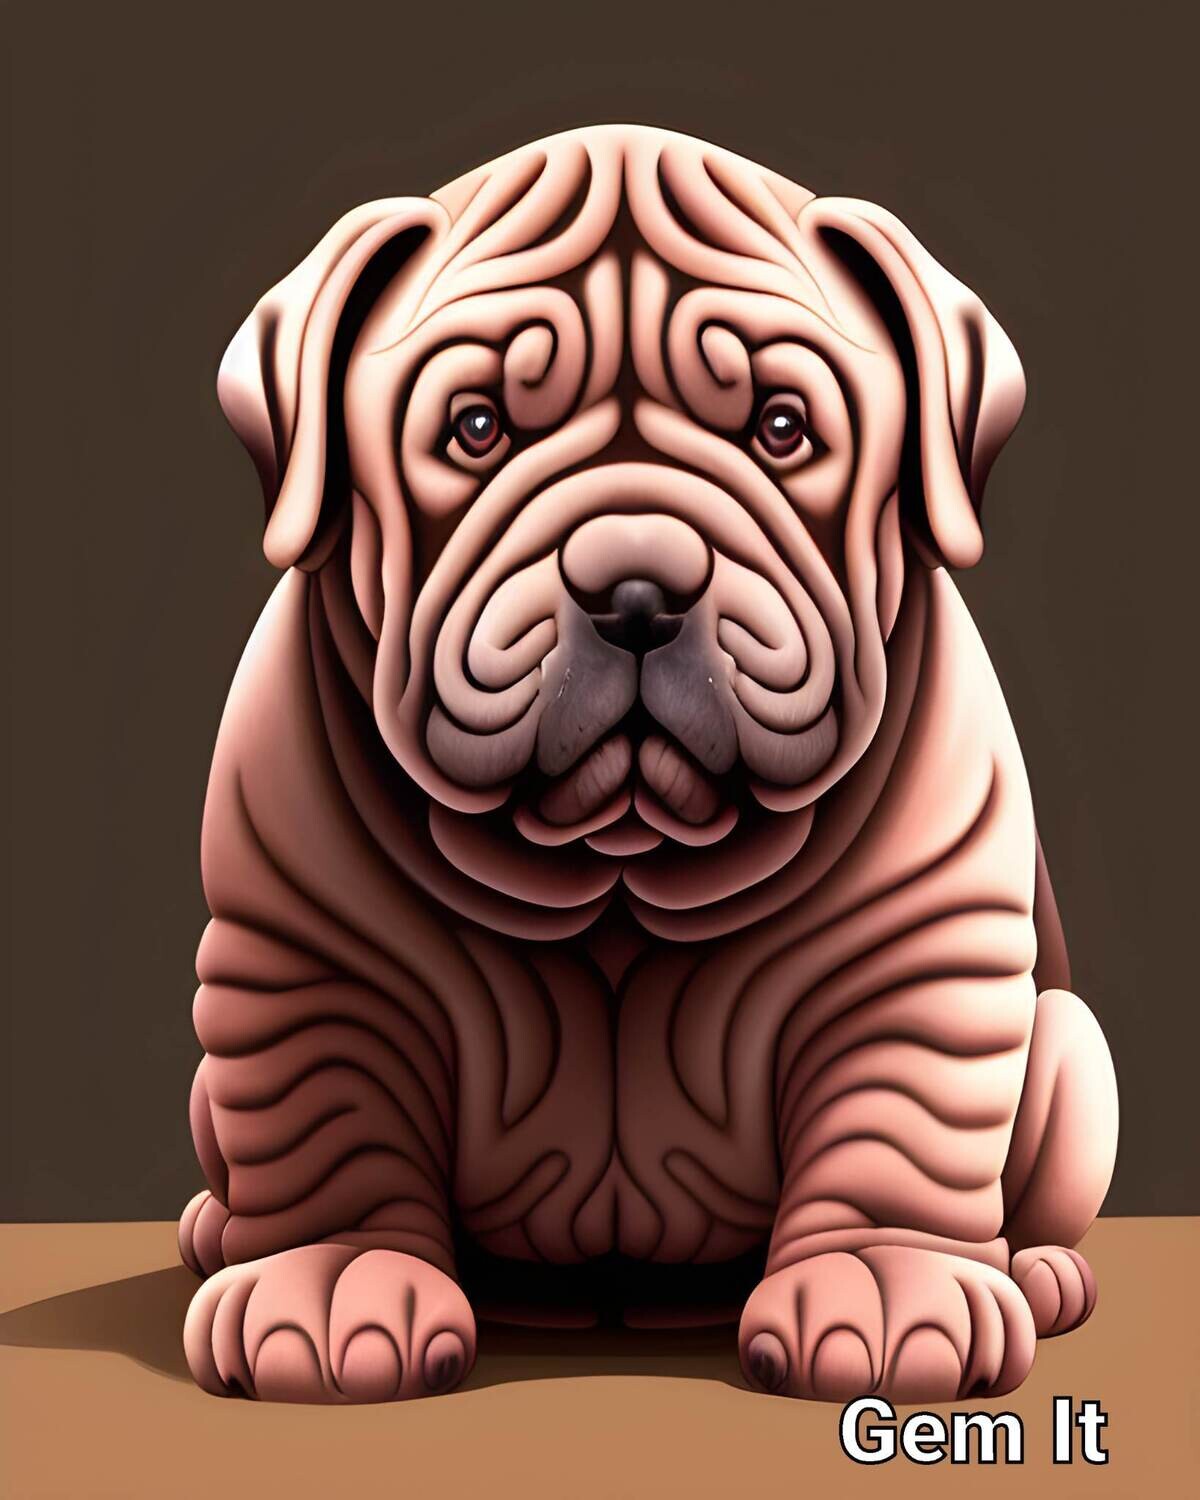 Shar Pei - Specially ordered for you. Delivery is approximately 4 - 6 weeks.